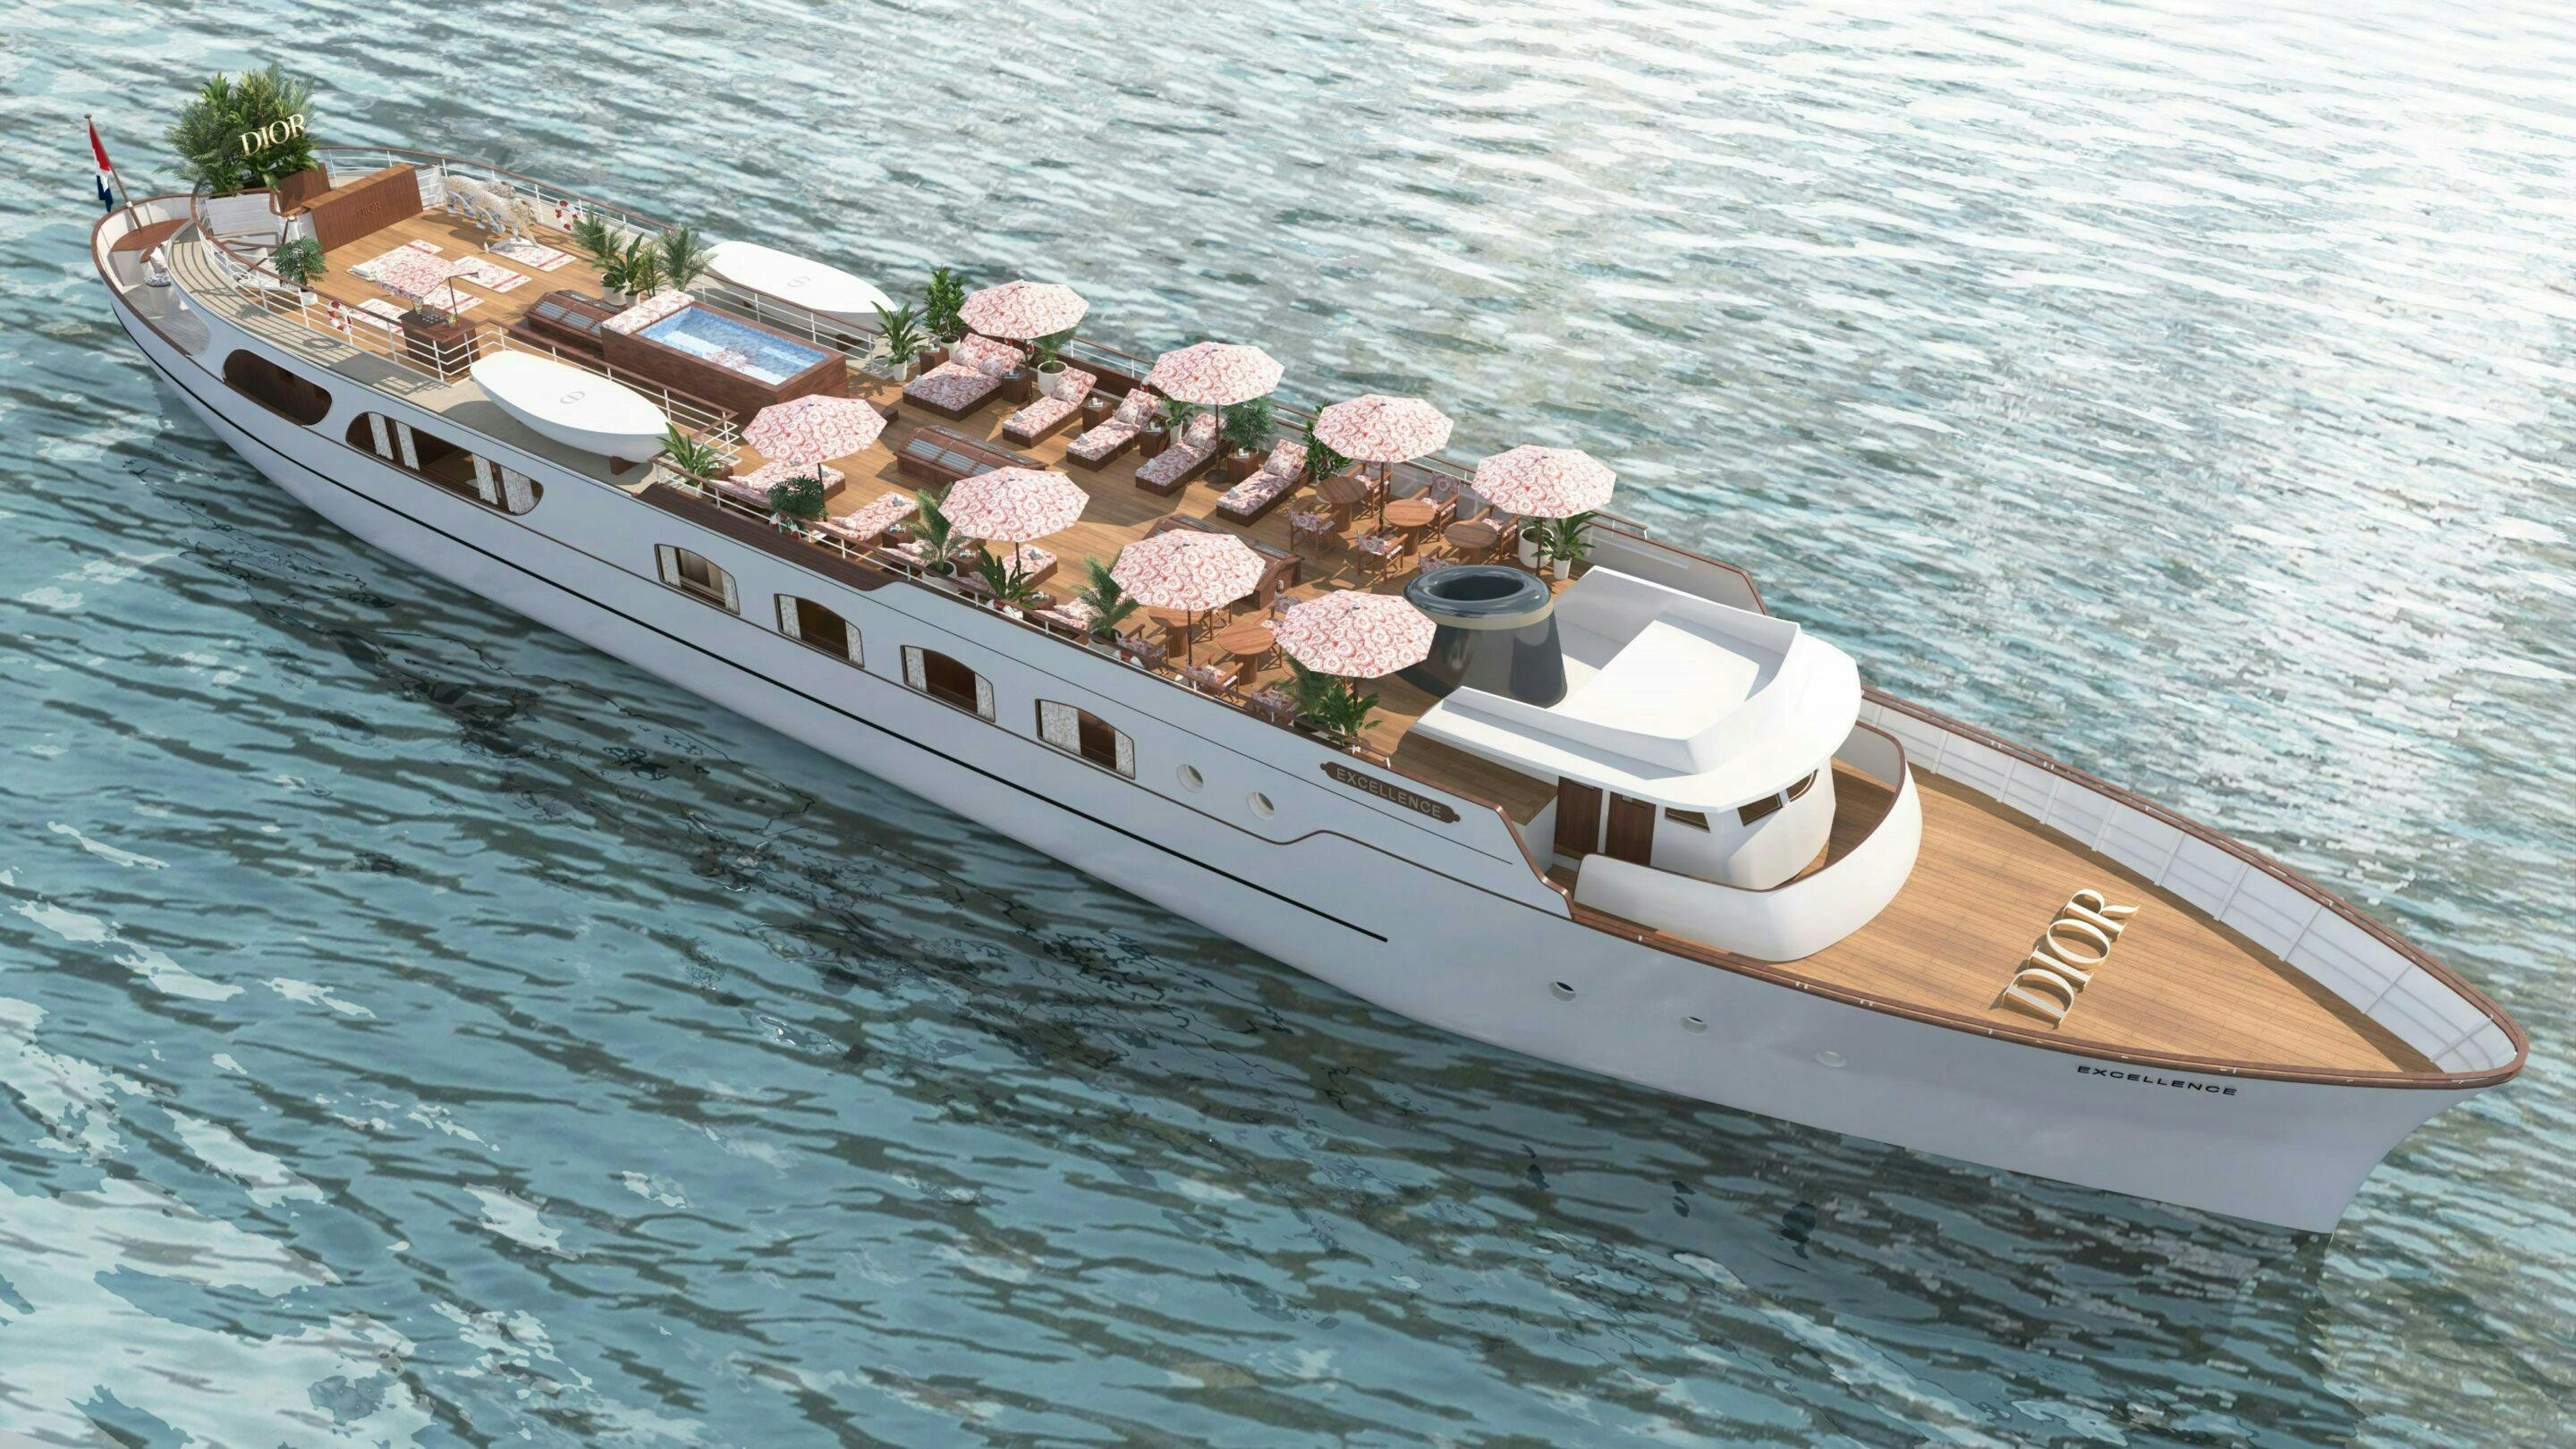 transportation vehicle yacht boat boating leisure activities sport water water sports plant